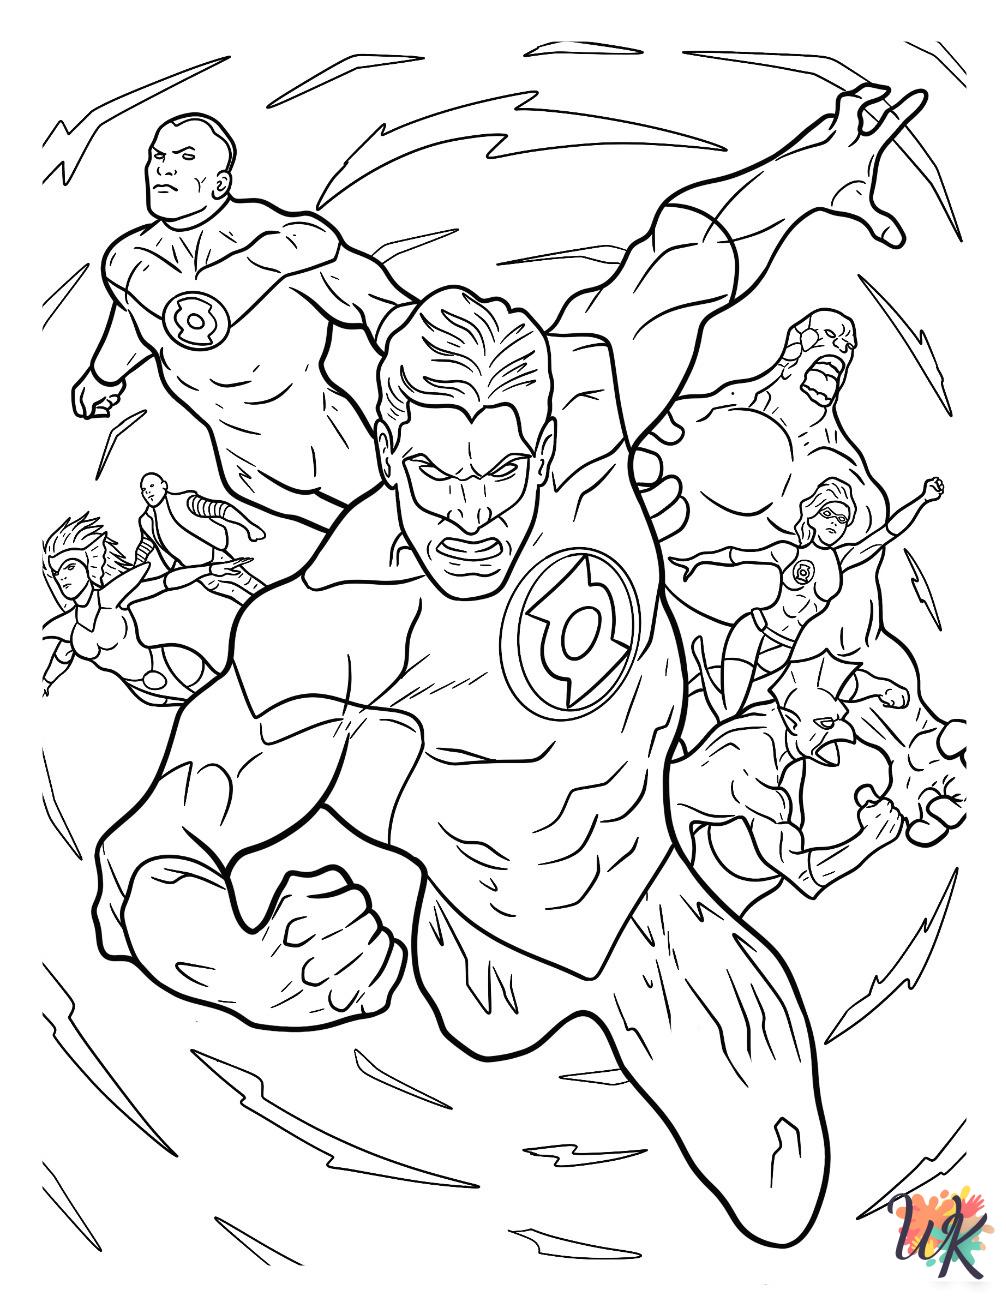 detailed Green Lantern coloring pages for adults